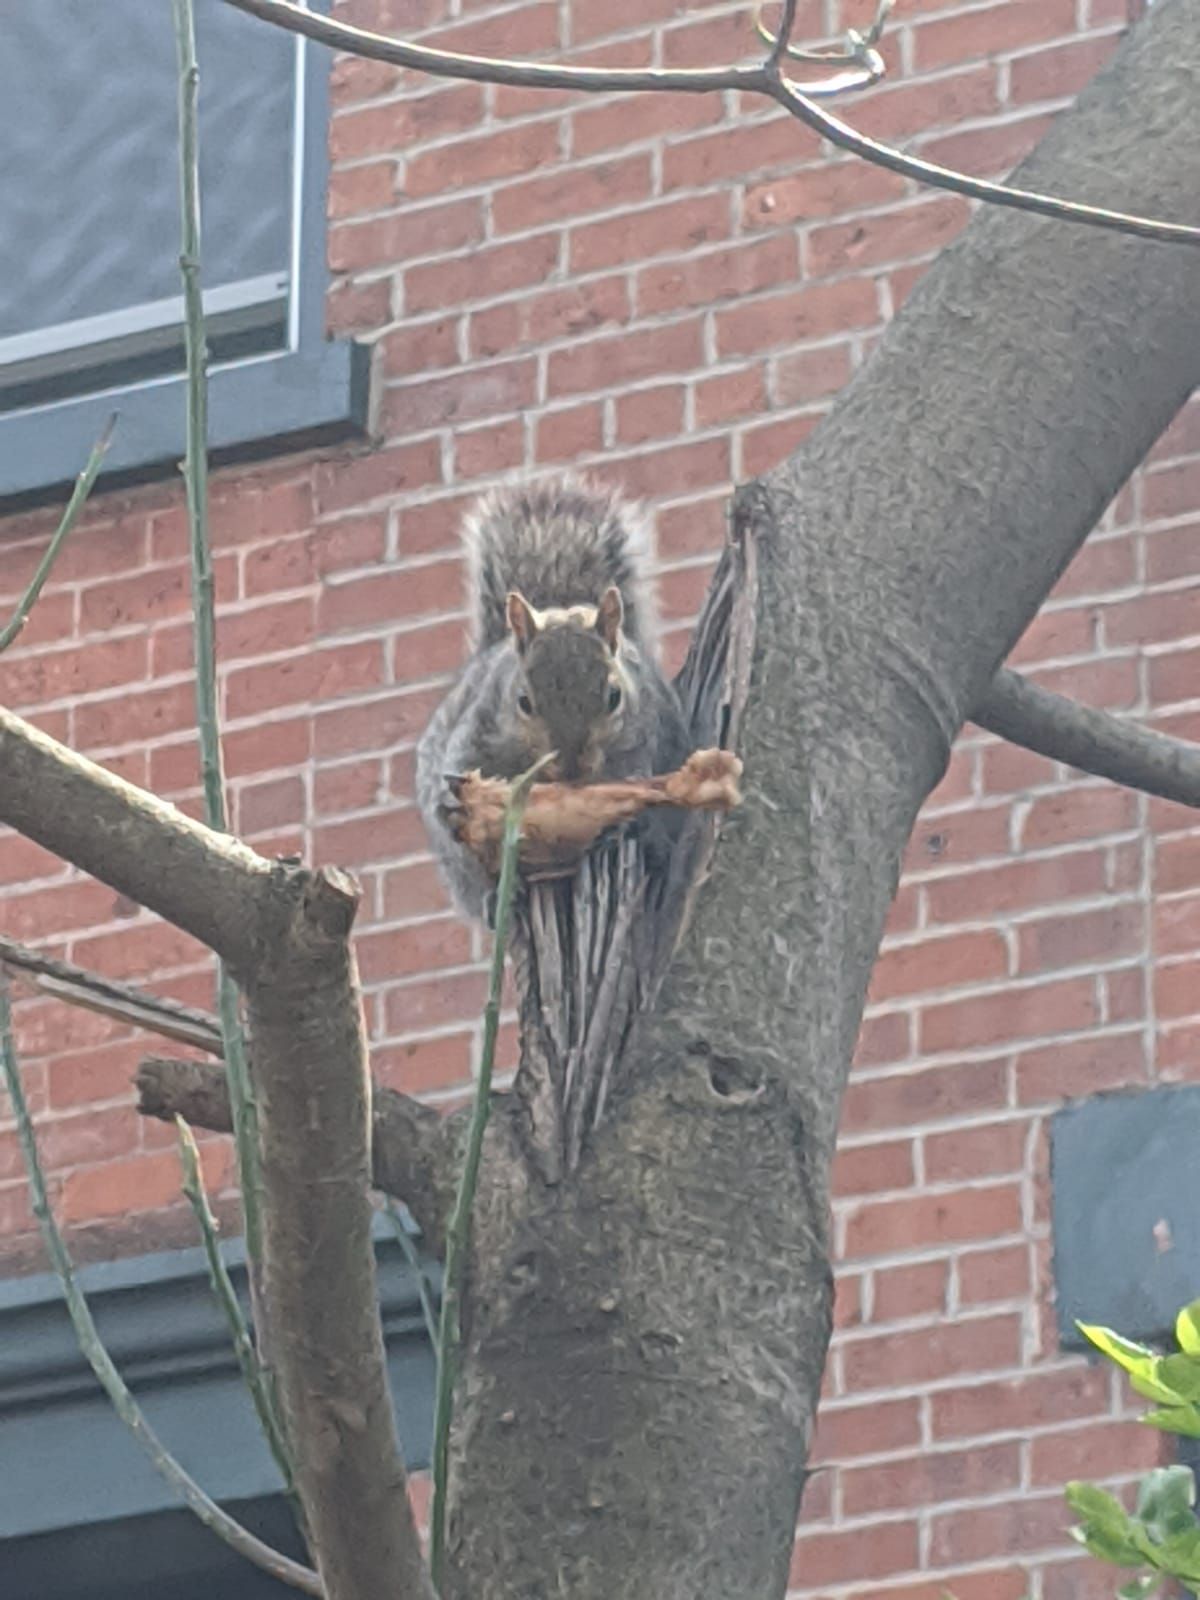 I found a squirrel eating fried chicken in a tree.